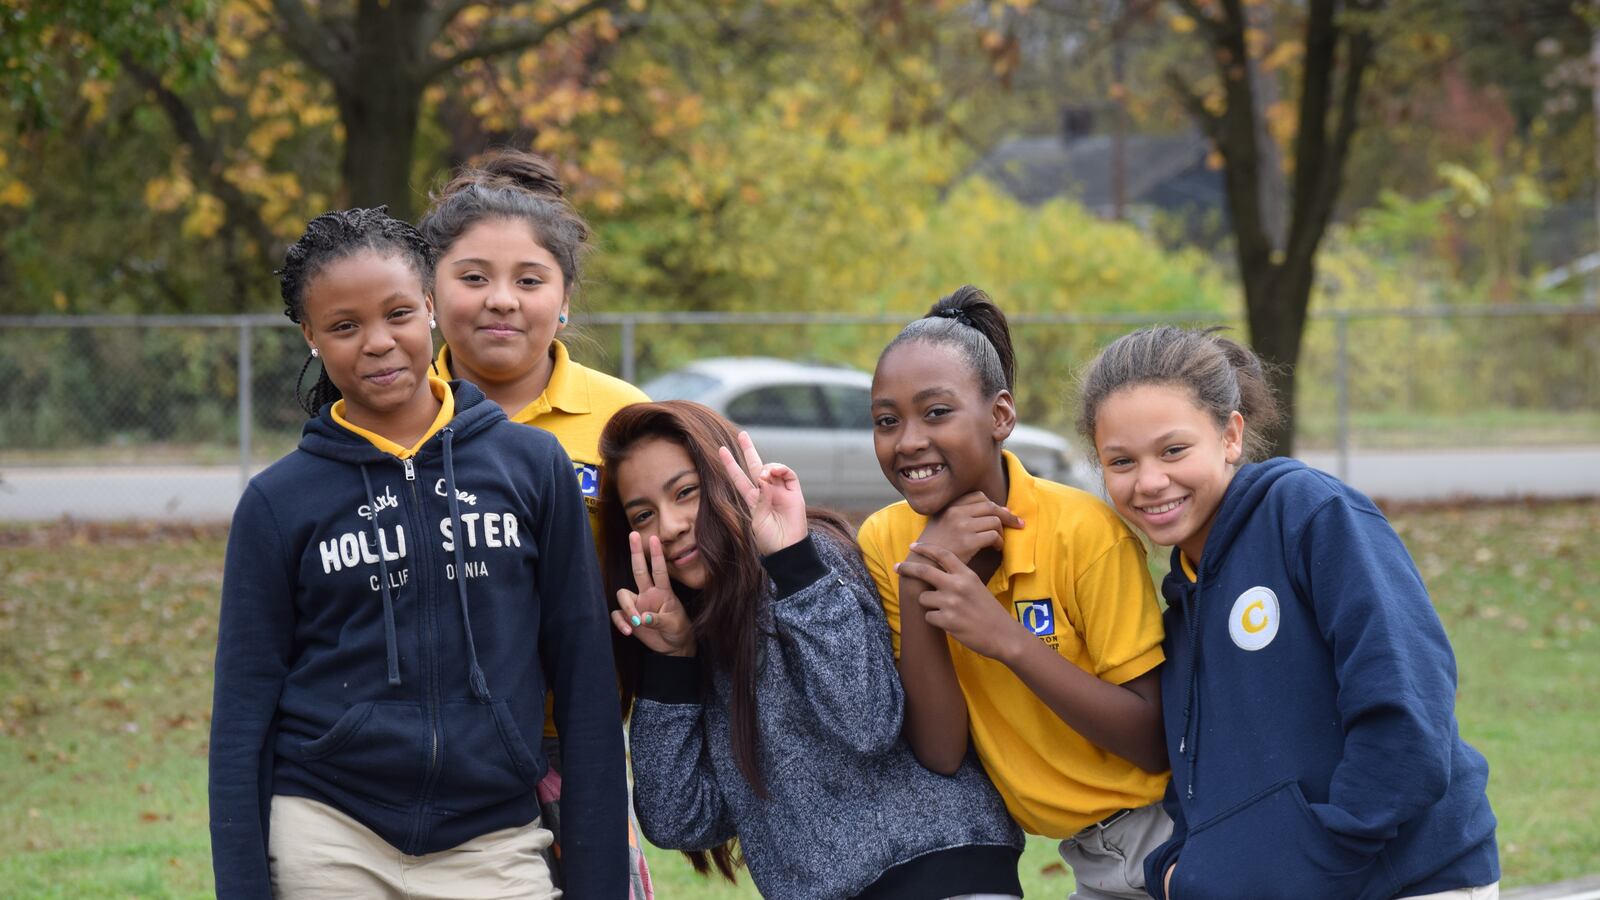 Students at Cameron College Prep, a Nashville middle school for grades 5-8